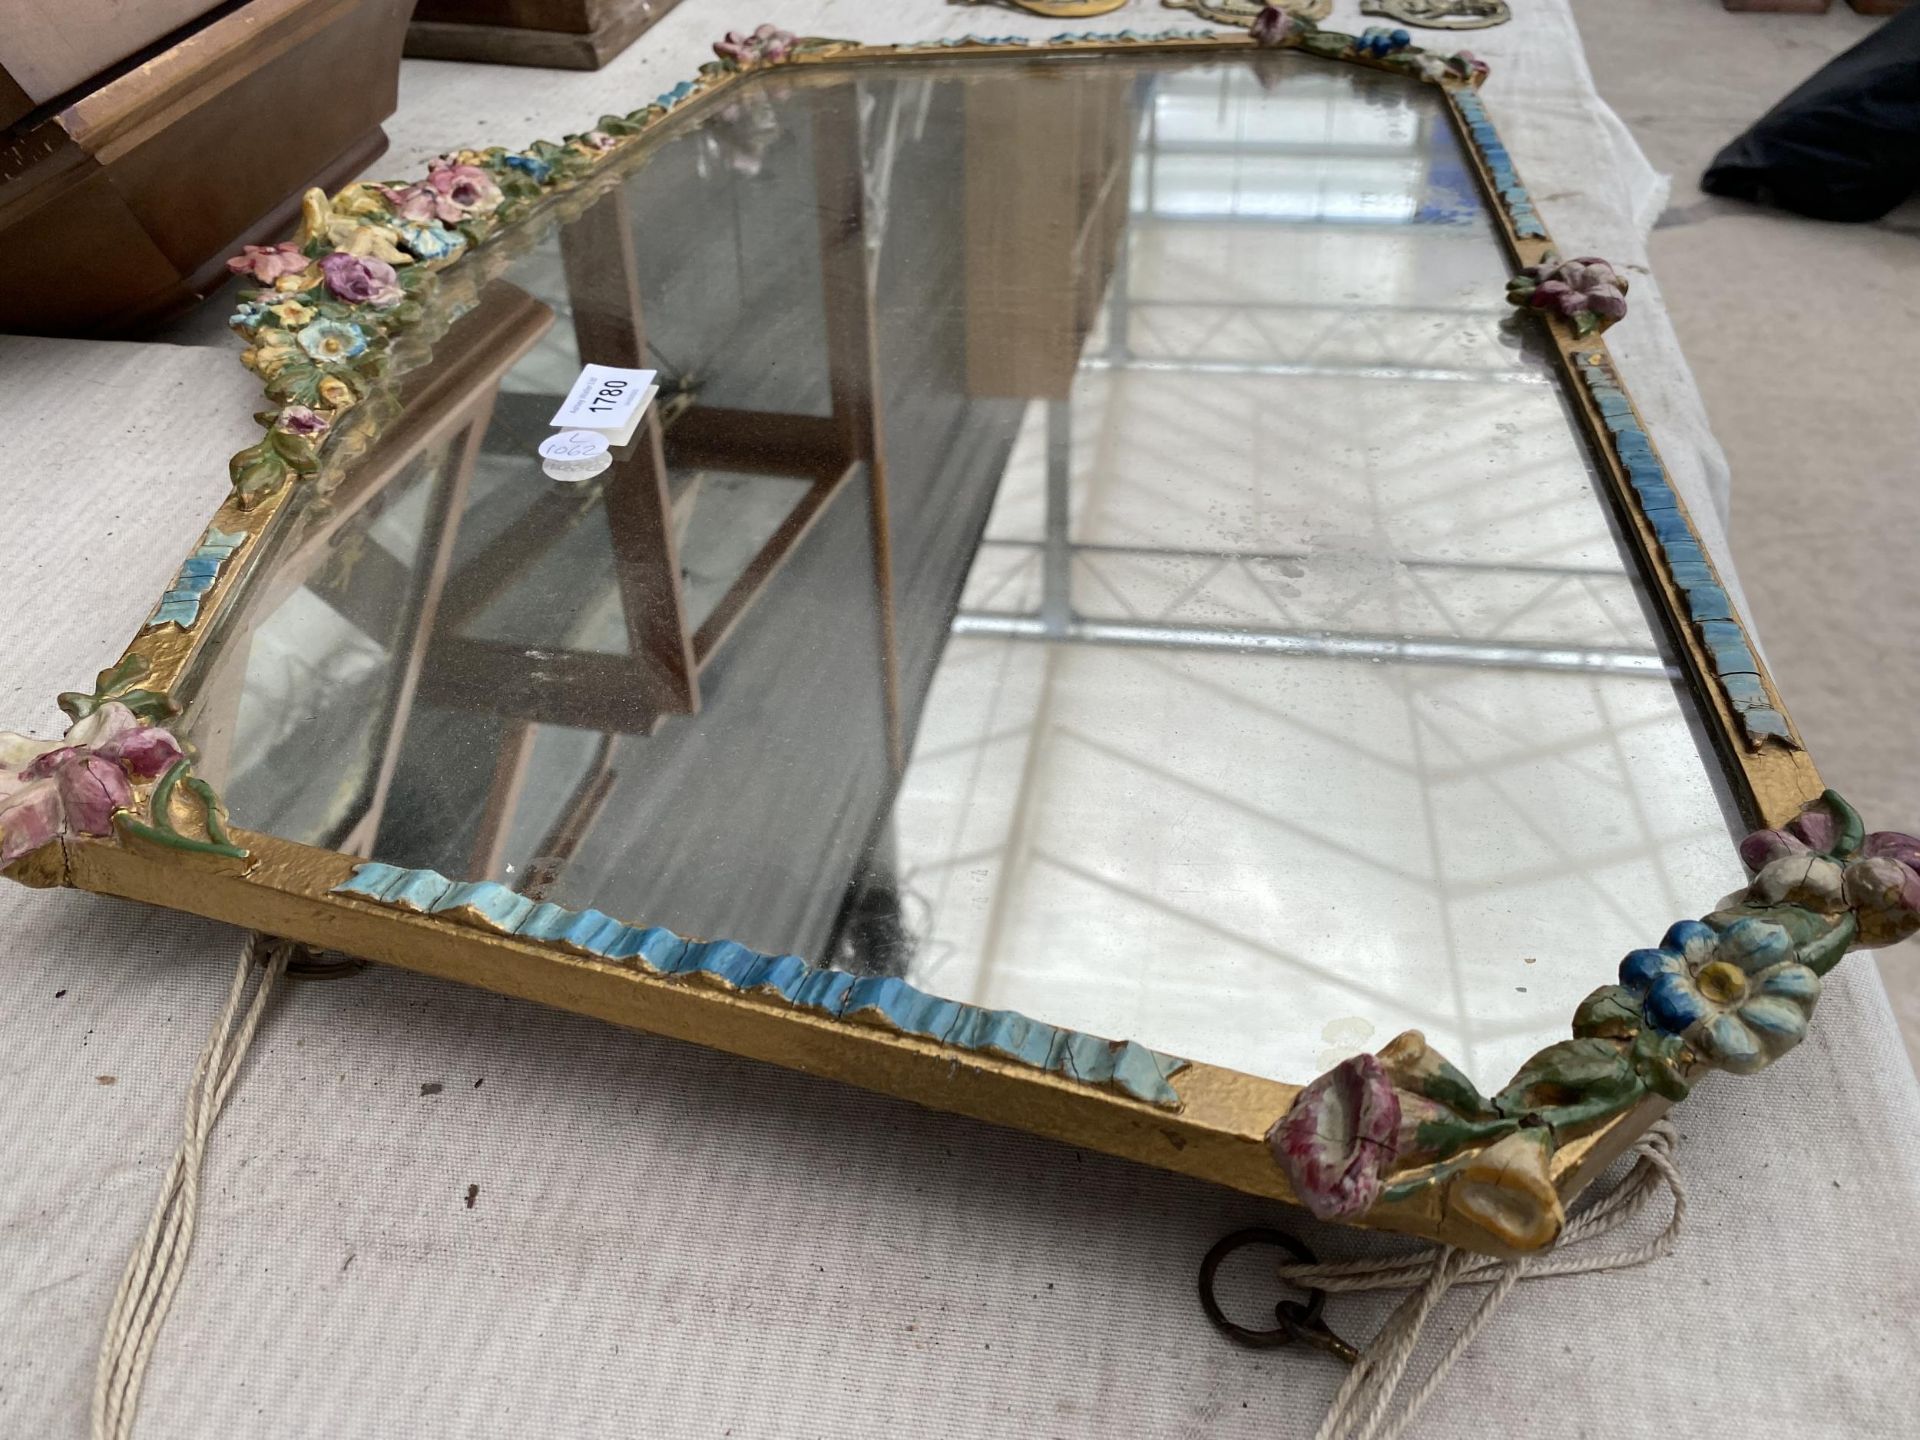 TWO ITEMS - A VINTAGE FLORAL BARBOLA MIRROR AND A MODERN 31 DAY CLOCK - Image 7 of 7